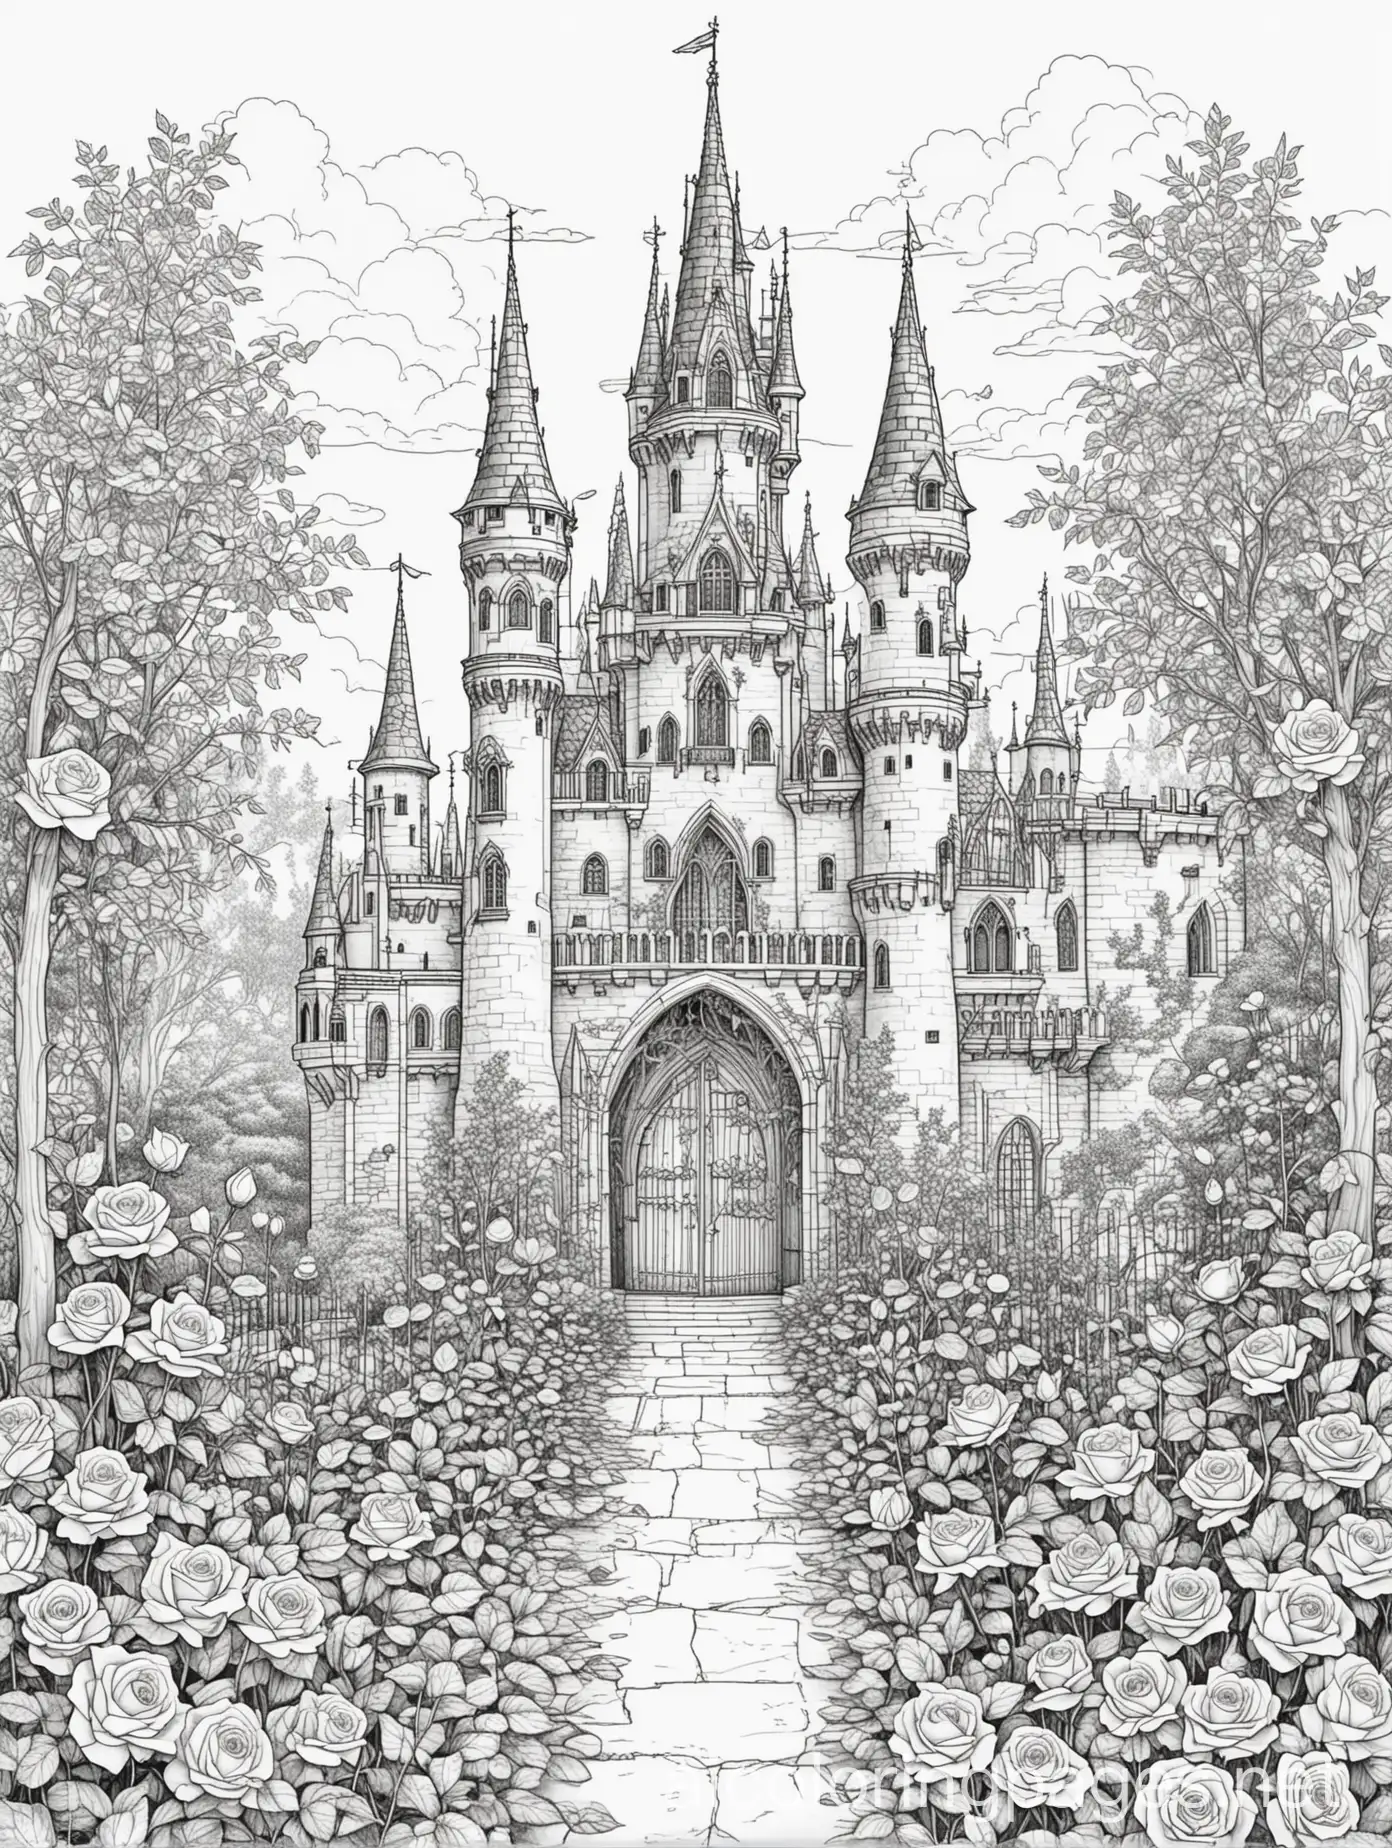 roses garden gothic castle, Coloring Page, black and white, line art, white background, Simplicity, Ample White Space. The background of the coloring page is plain white to make it easy for young children to color within the lines. The outlines of all the subjects are easy to distinguish, making it simple for kids to color without too much difficulty